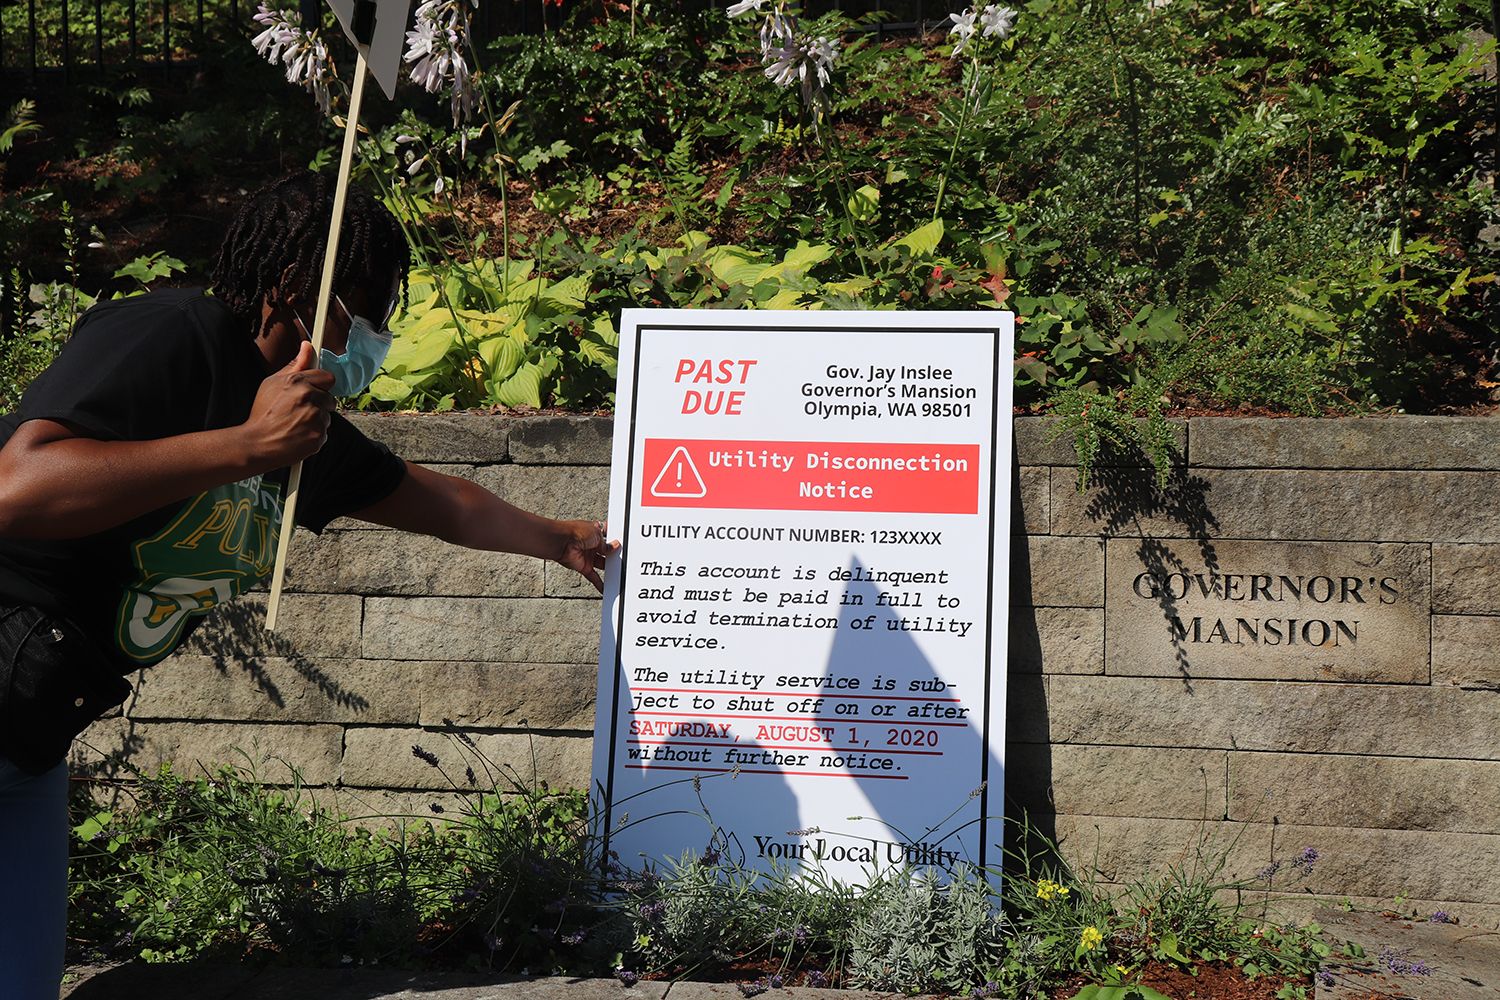 Yolanda placing a giant shut-off notice in front of the Governor's Mansion